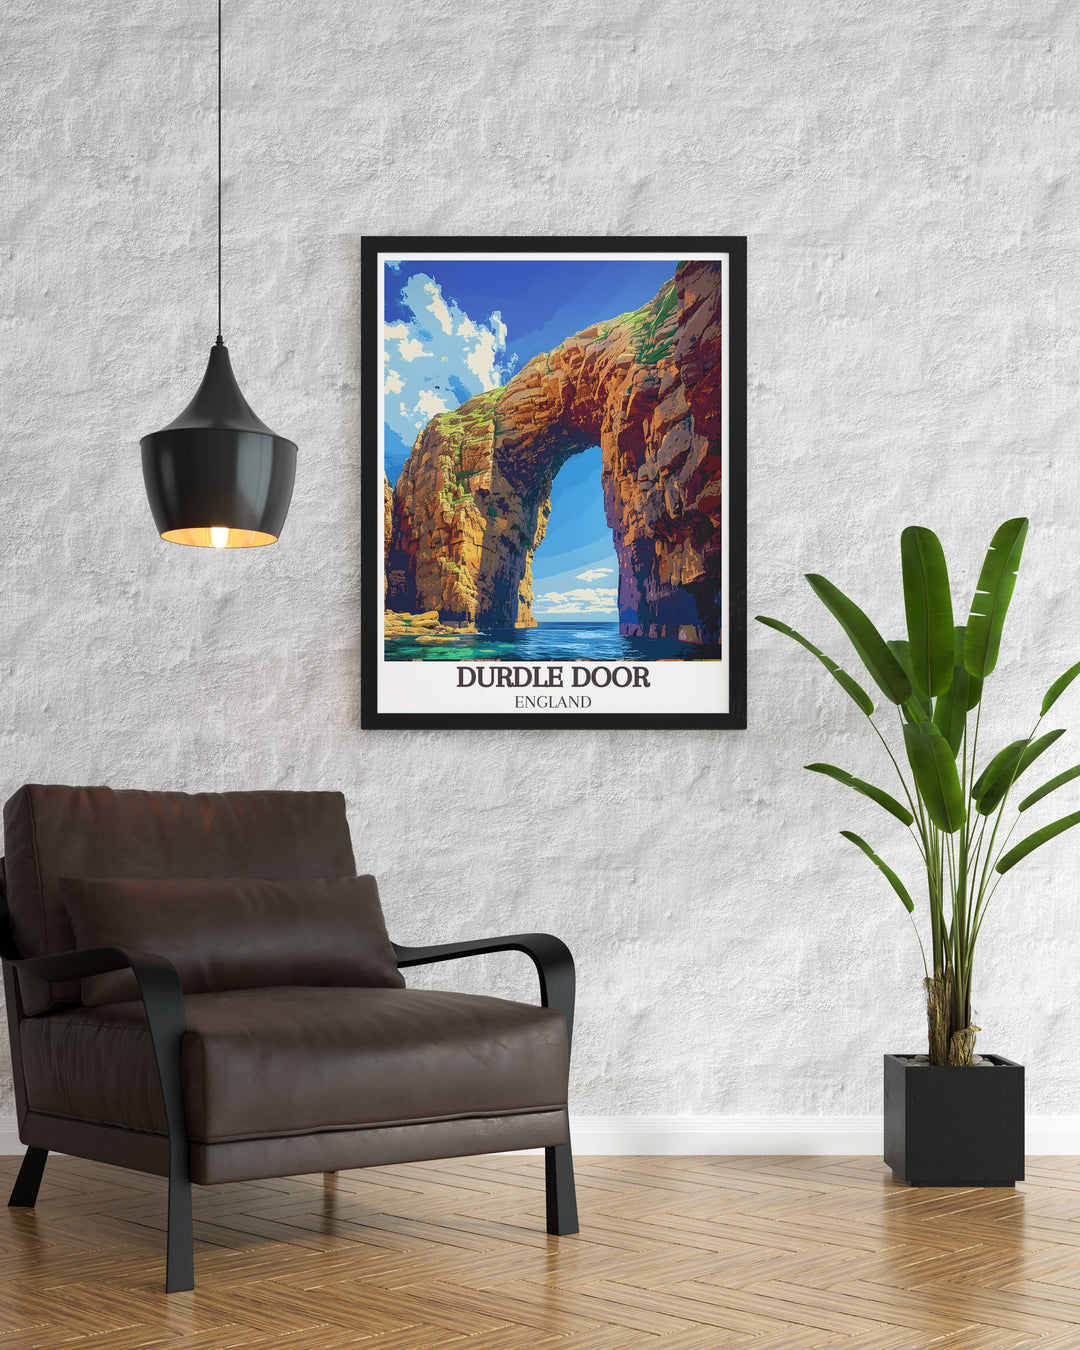 Durdle Door Arch captured in a vintage travel print highlighting the beauty of the Jurassic Coast in Dorset perfect for wall art and home decor bringing the stunning scenery of this iconic landmark into your home ideal for gifts and collectors.